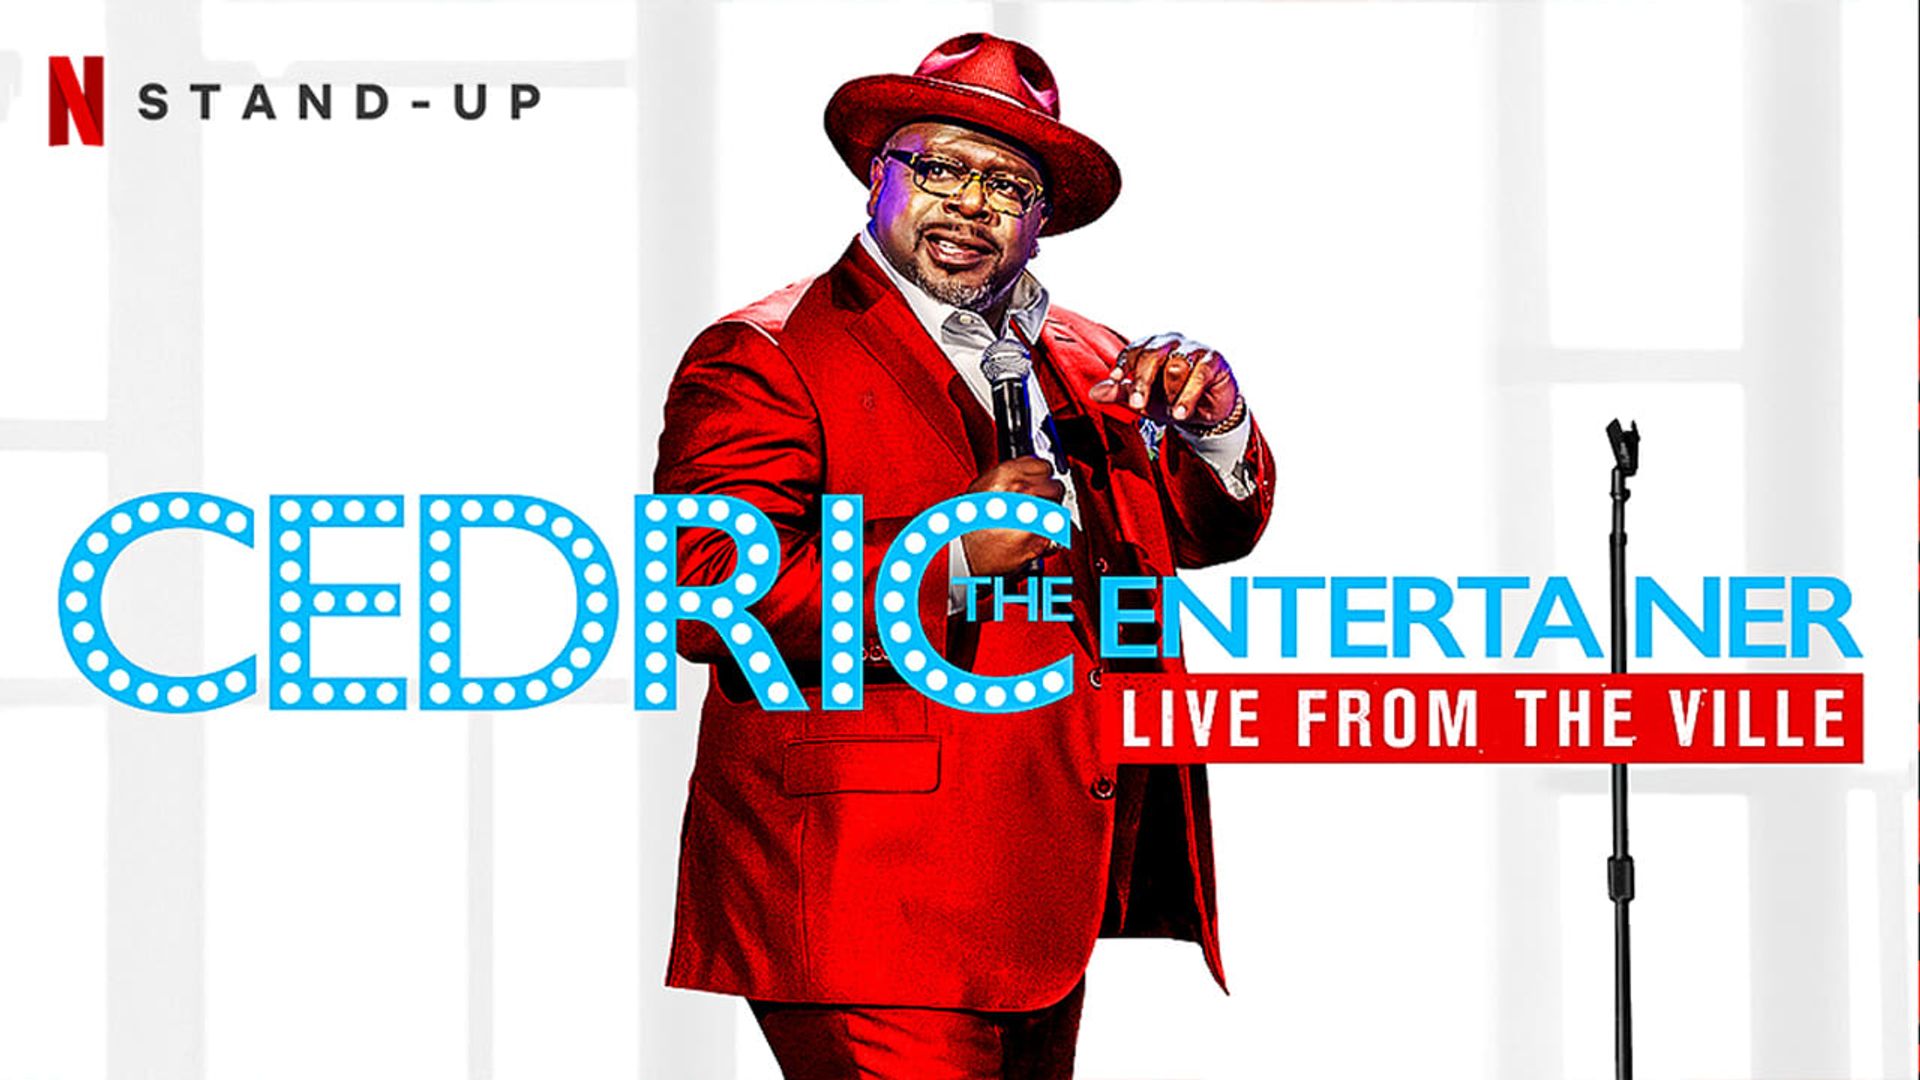 Cedric the Entertainer: Live from the Ville background